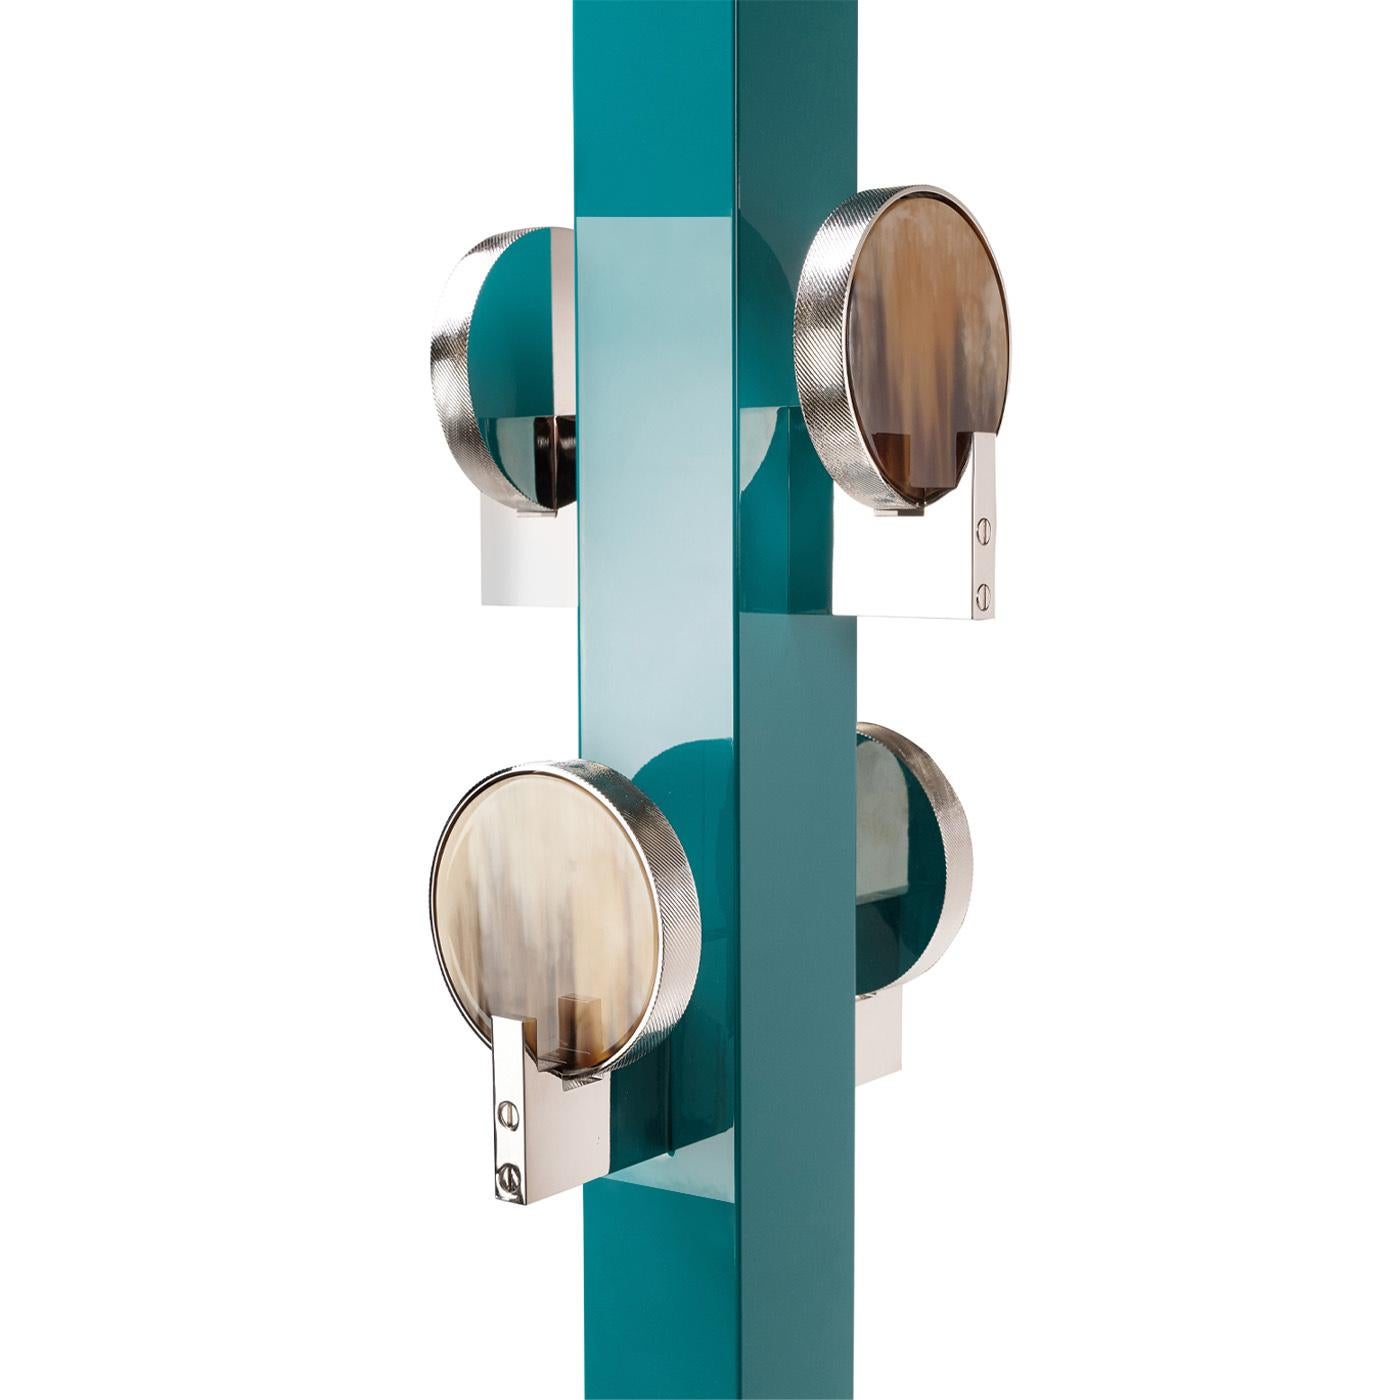 Stylish yet fuctional, our Linosa coat stand is a desirable element for the entryway or corridor. The wooden structure is proposed in a water blue colour lacquer and features five practical hooks that ensure large hanging space for your coats, bags